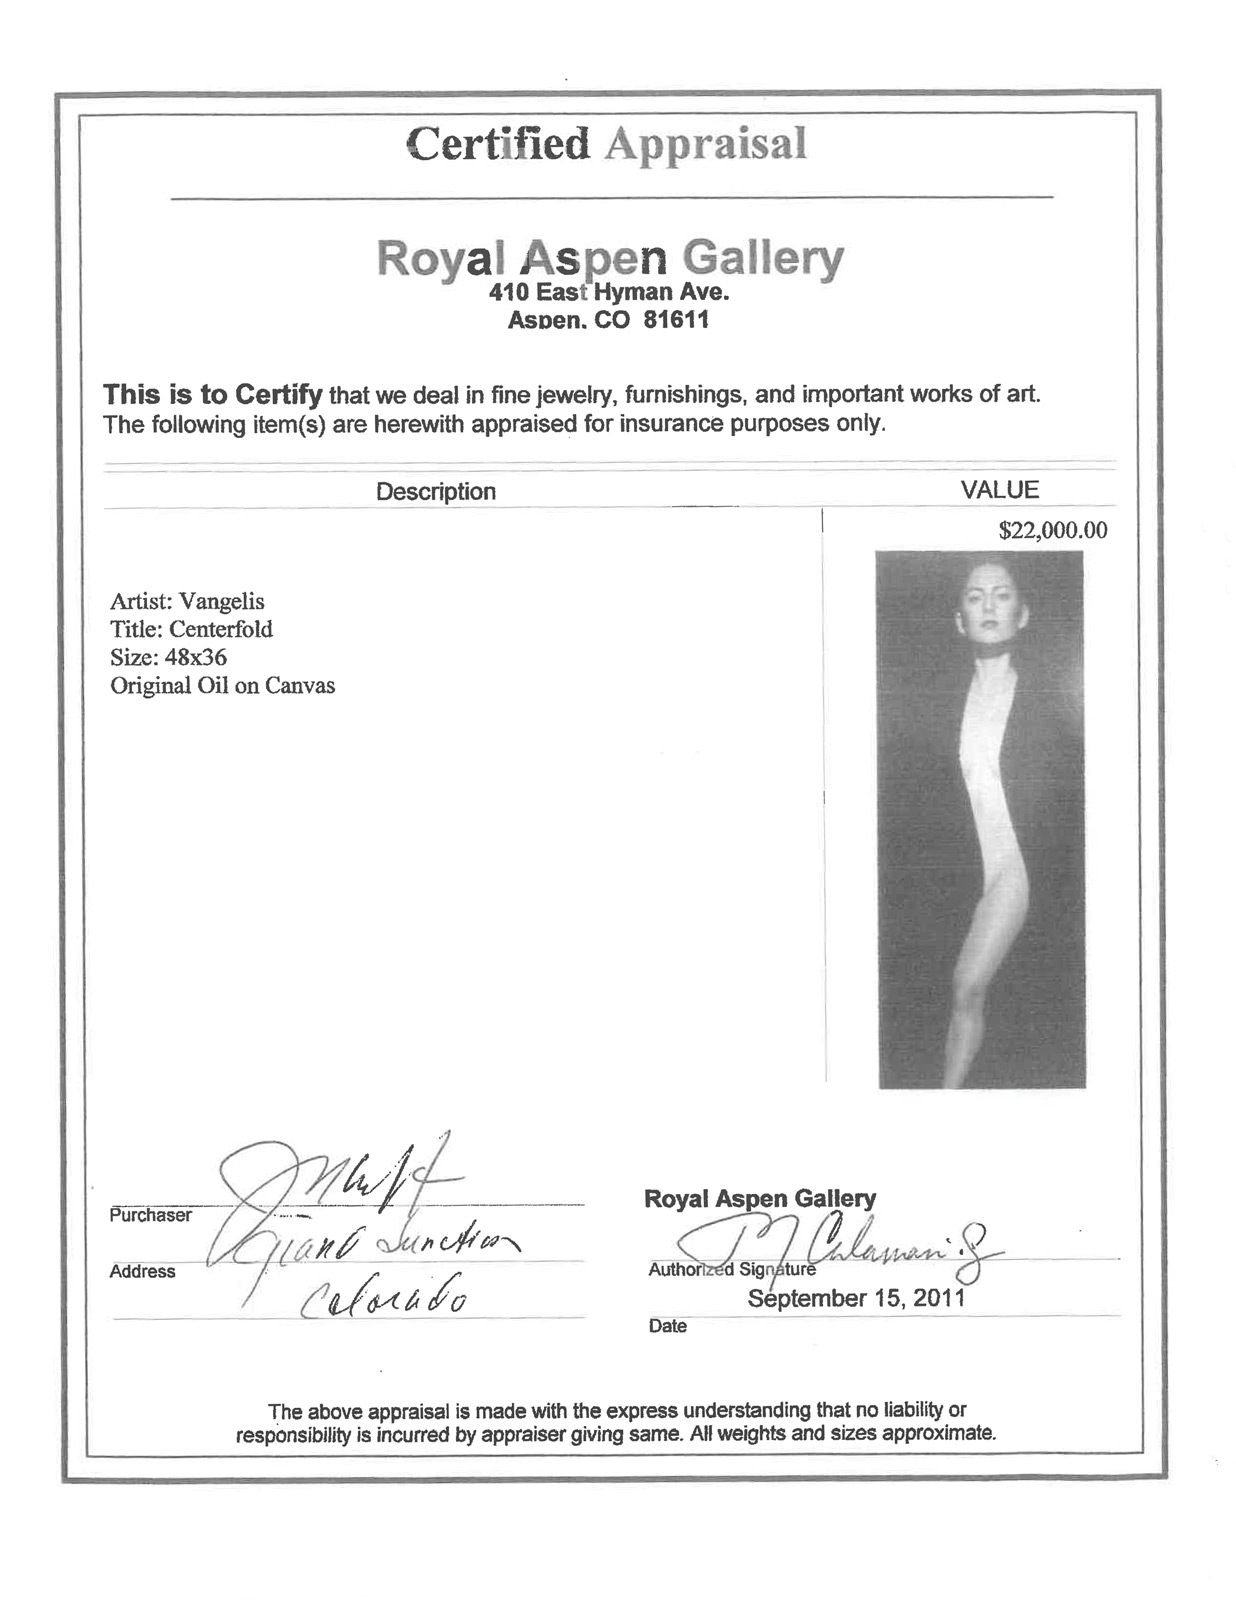 scanned copy of painting appraisal by Royal Aspen Gallery valuing painting at $22,000